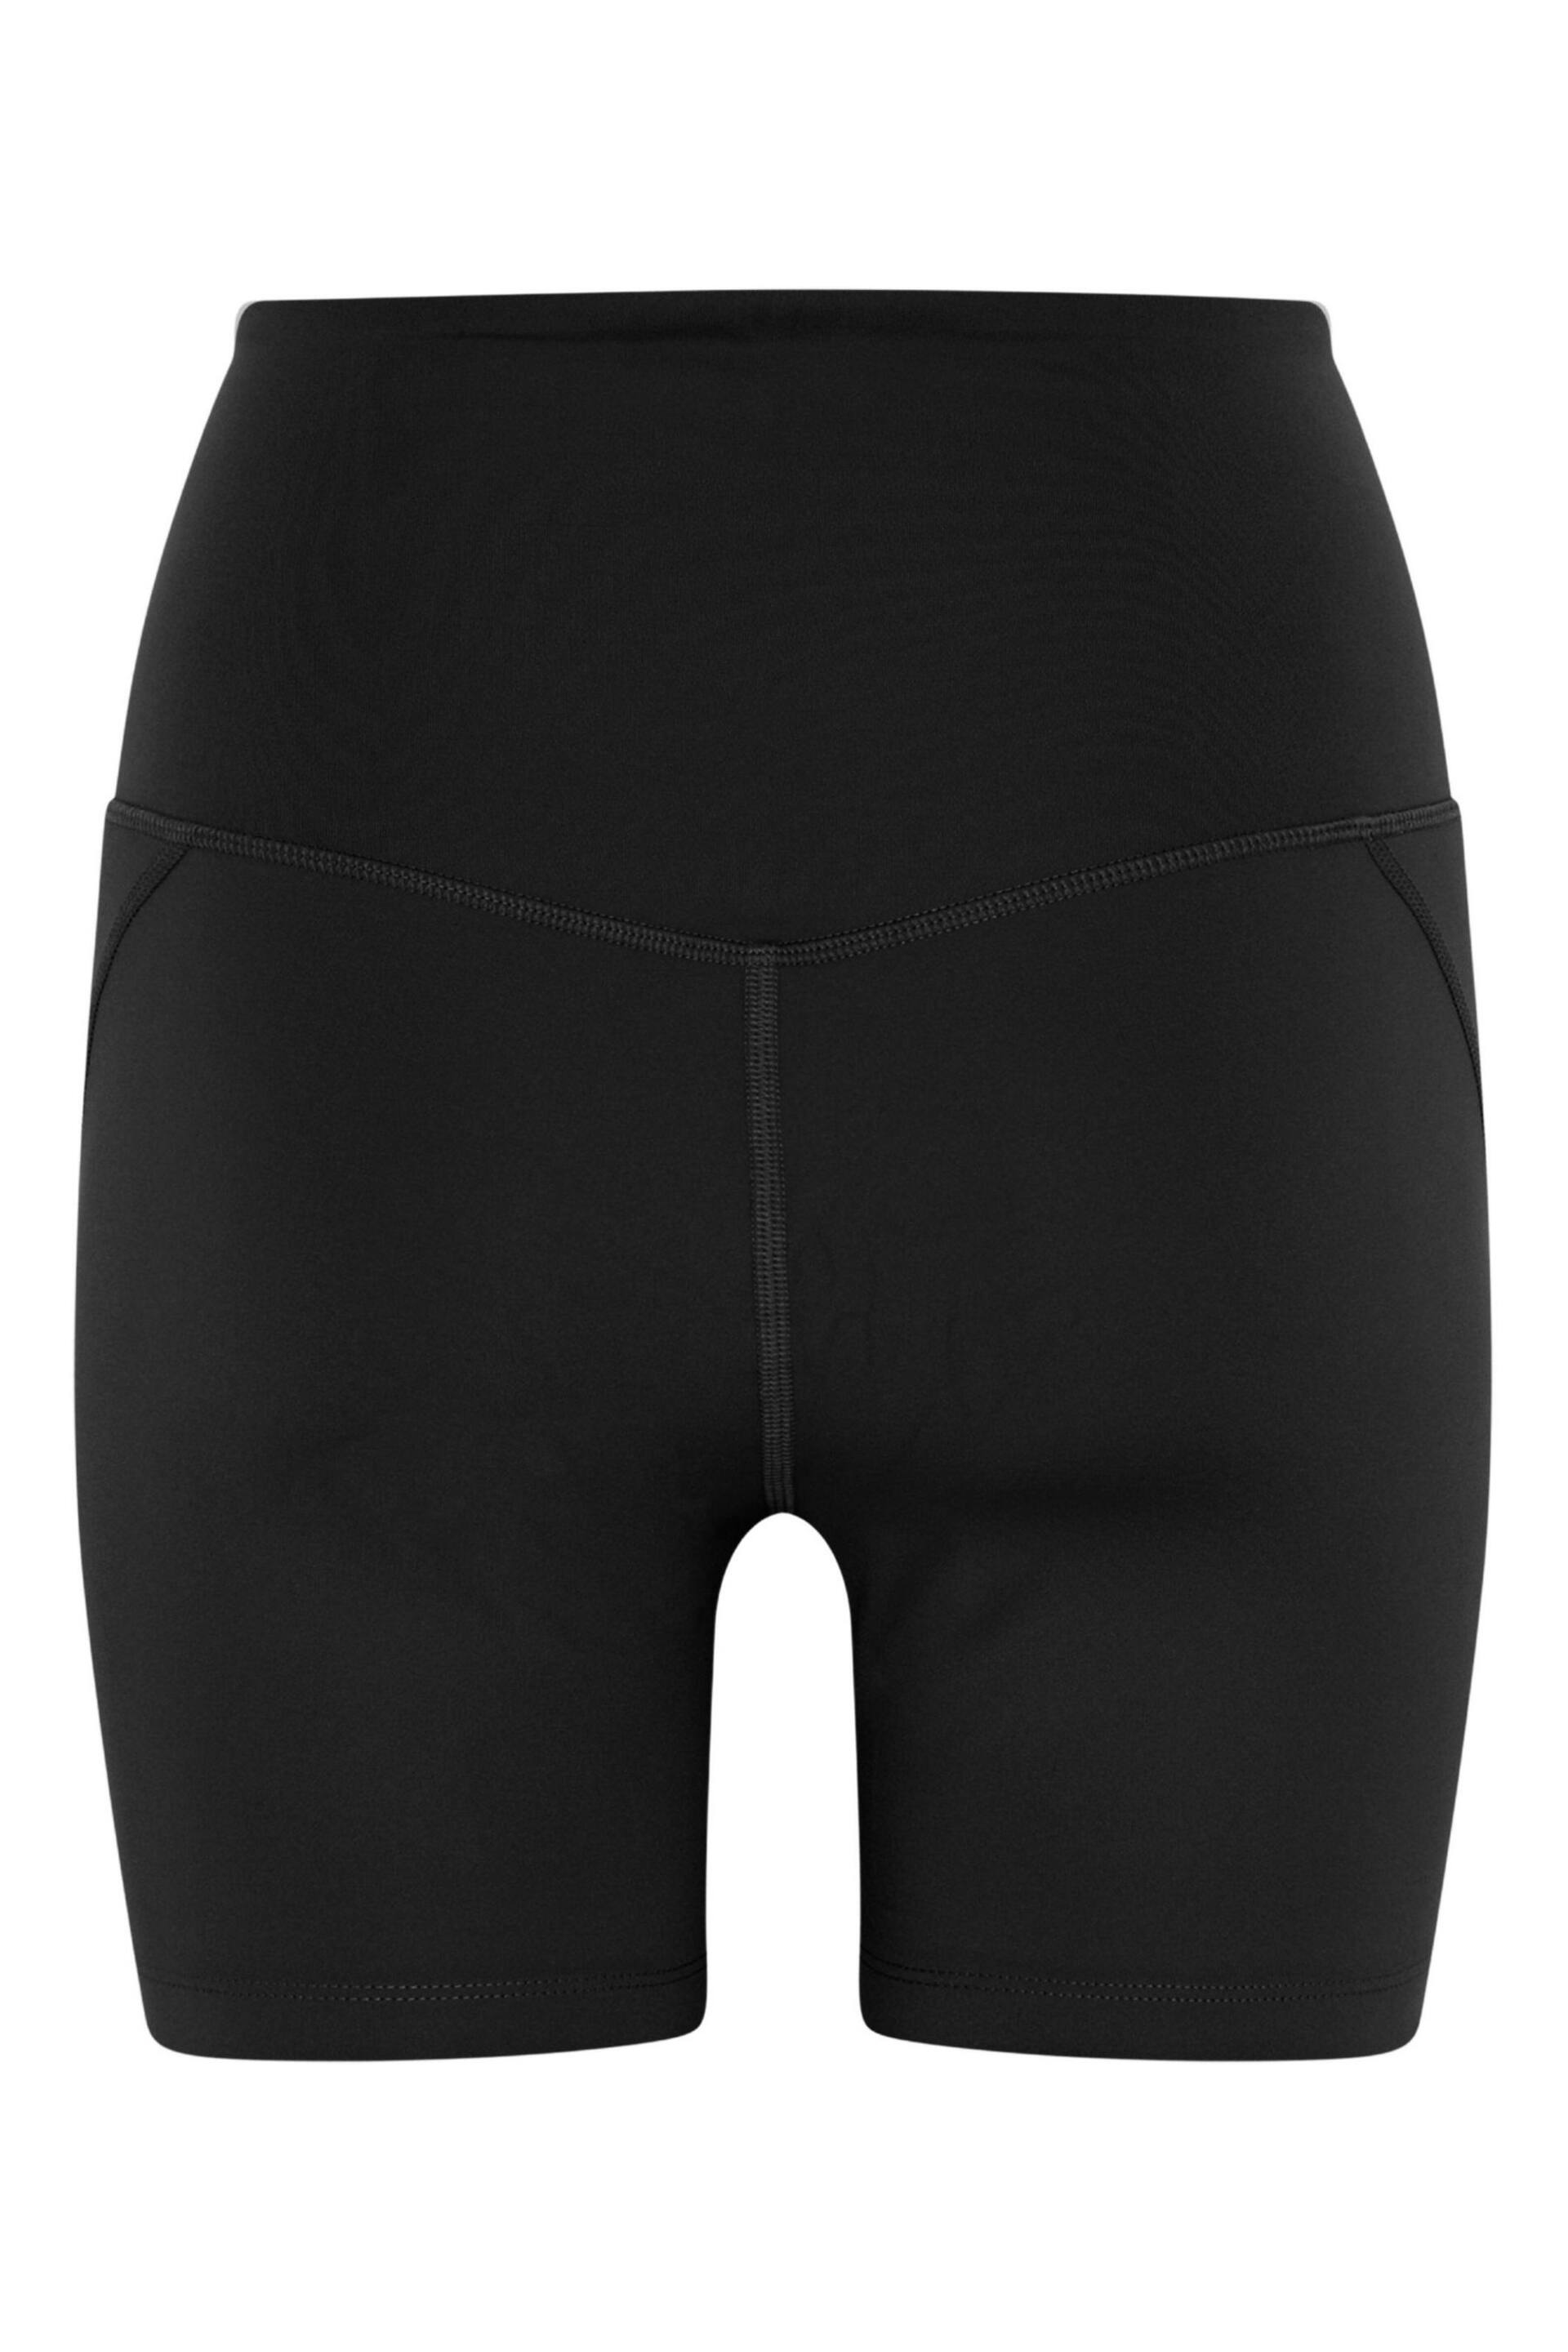 Girlfriend Collective High Rise Run Shorts - Image 9 of 10